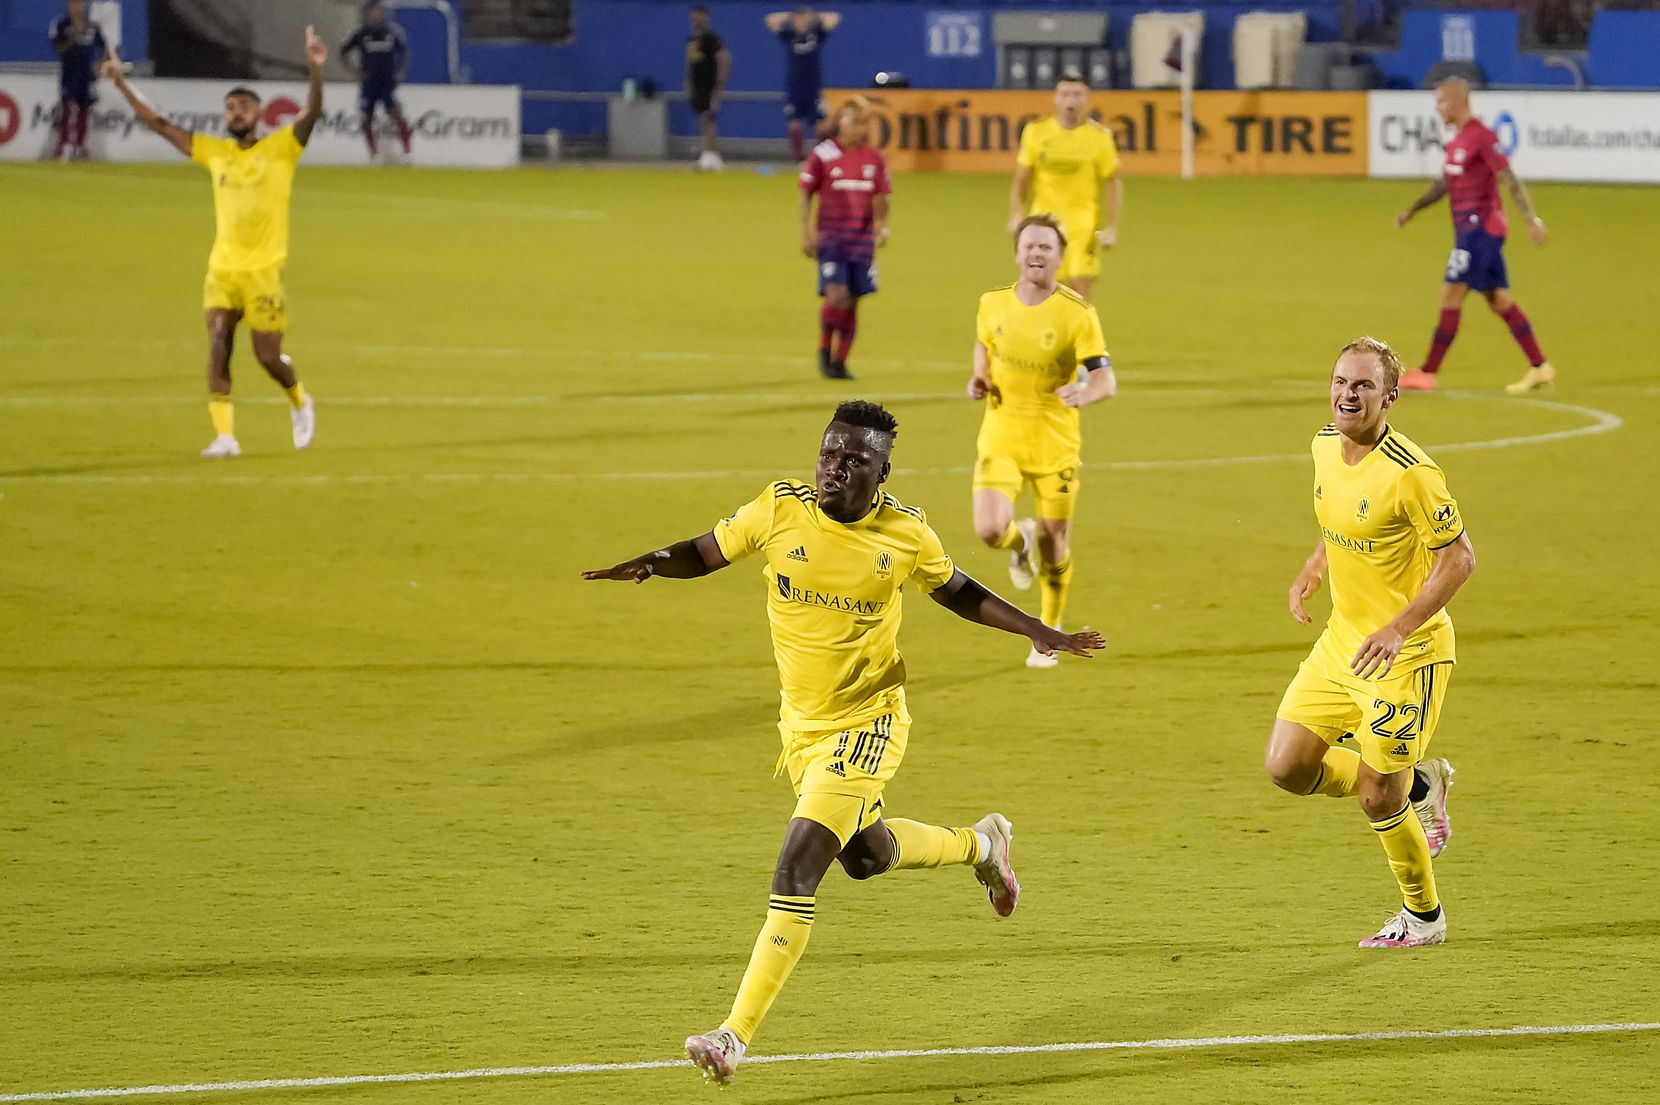 Nashville SC forward David Accam (11) celebrates after scoring during the 86th minute of a 1-0 victory over FC Dallas in an MLS soccer game at Toyota Stadium on Wednesday, Aug. 12, 2020, in Frisco, Texas. (Smiley N. Pool/The Dallas Morning News)